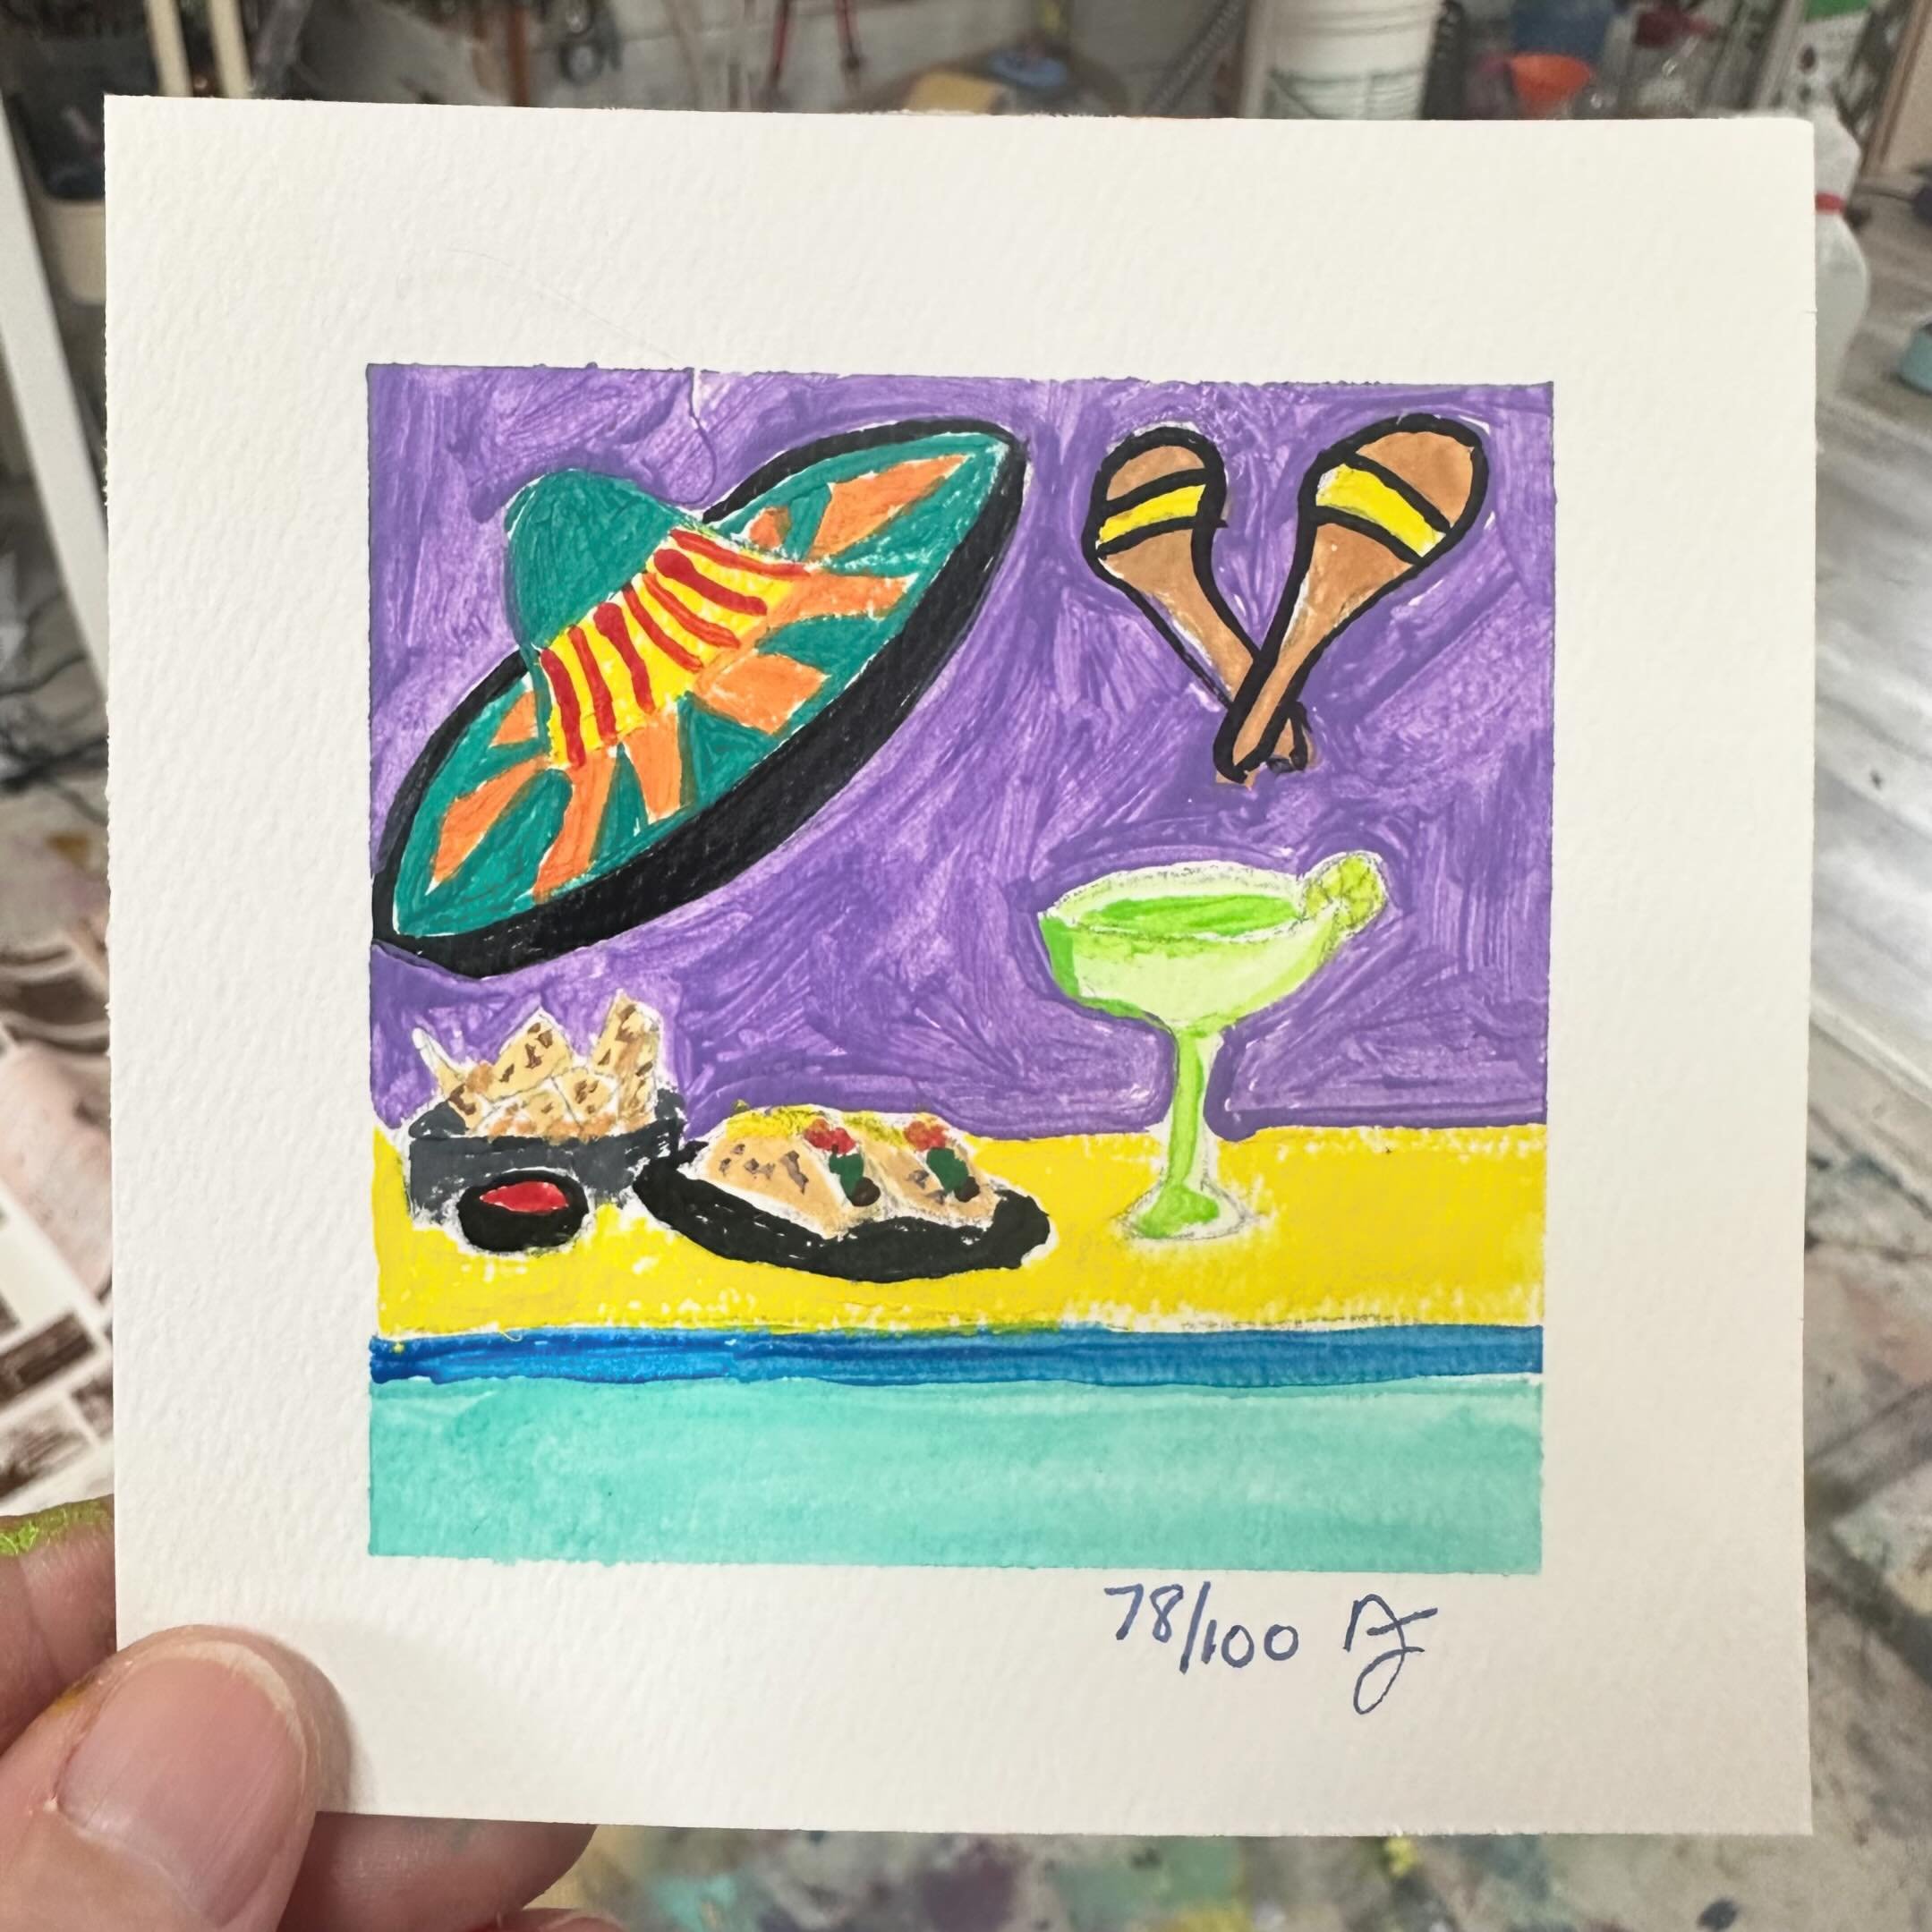 #the100dayproject Day 78! Happy Cinco de Mayo!!! We had enchiladas today did you have anything to celebrate!!! 
.
.
#cincodemayo #artist #nikkijorgensen #art #miniart #createeveryday #tacos #create #paint